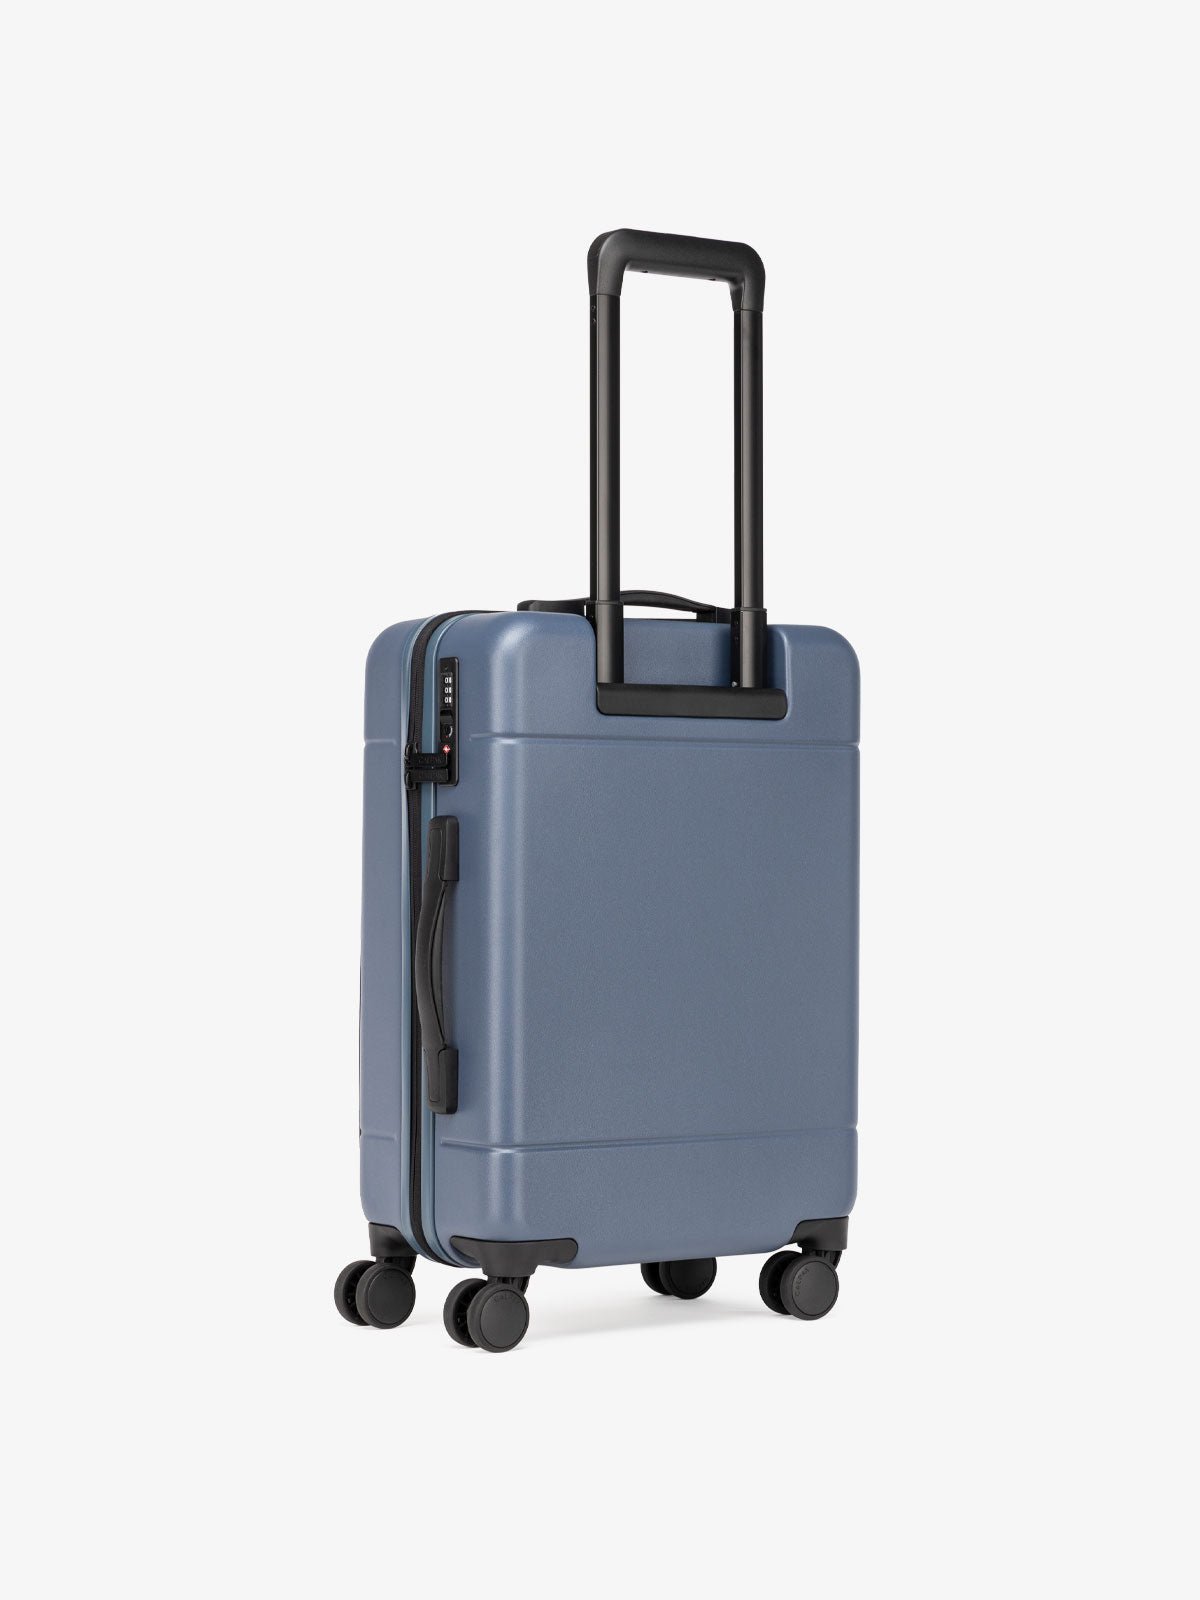 CALPAK Hue hard side carry-on luggage with spinner wheels in blue atlantic